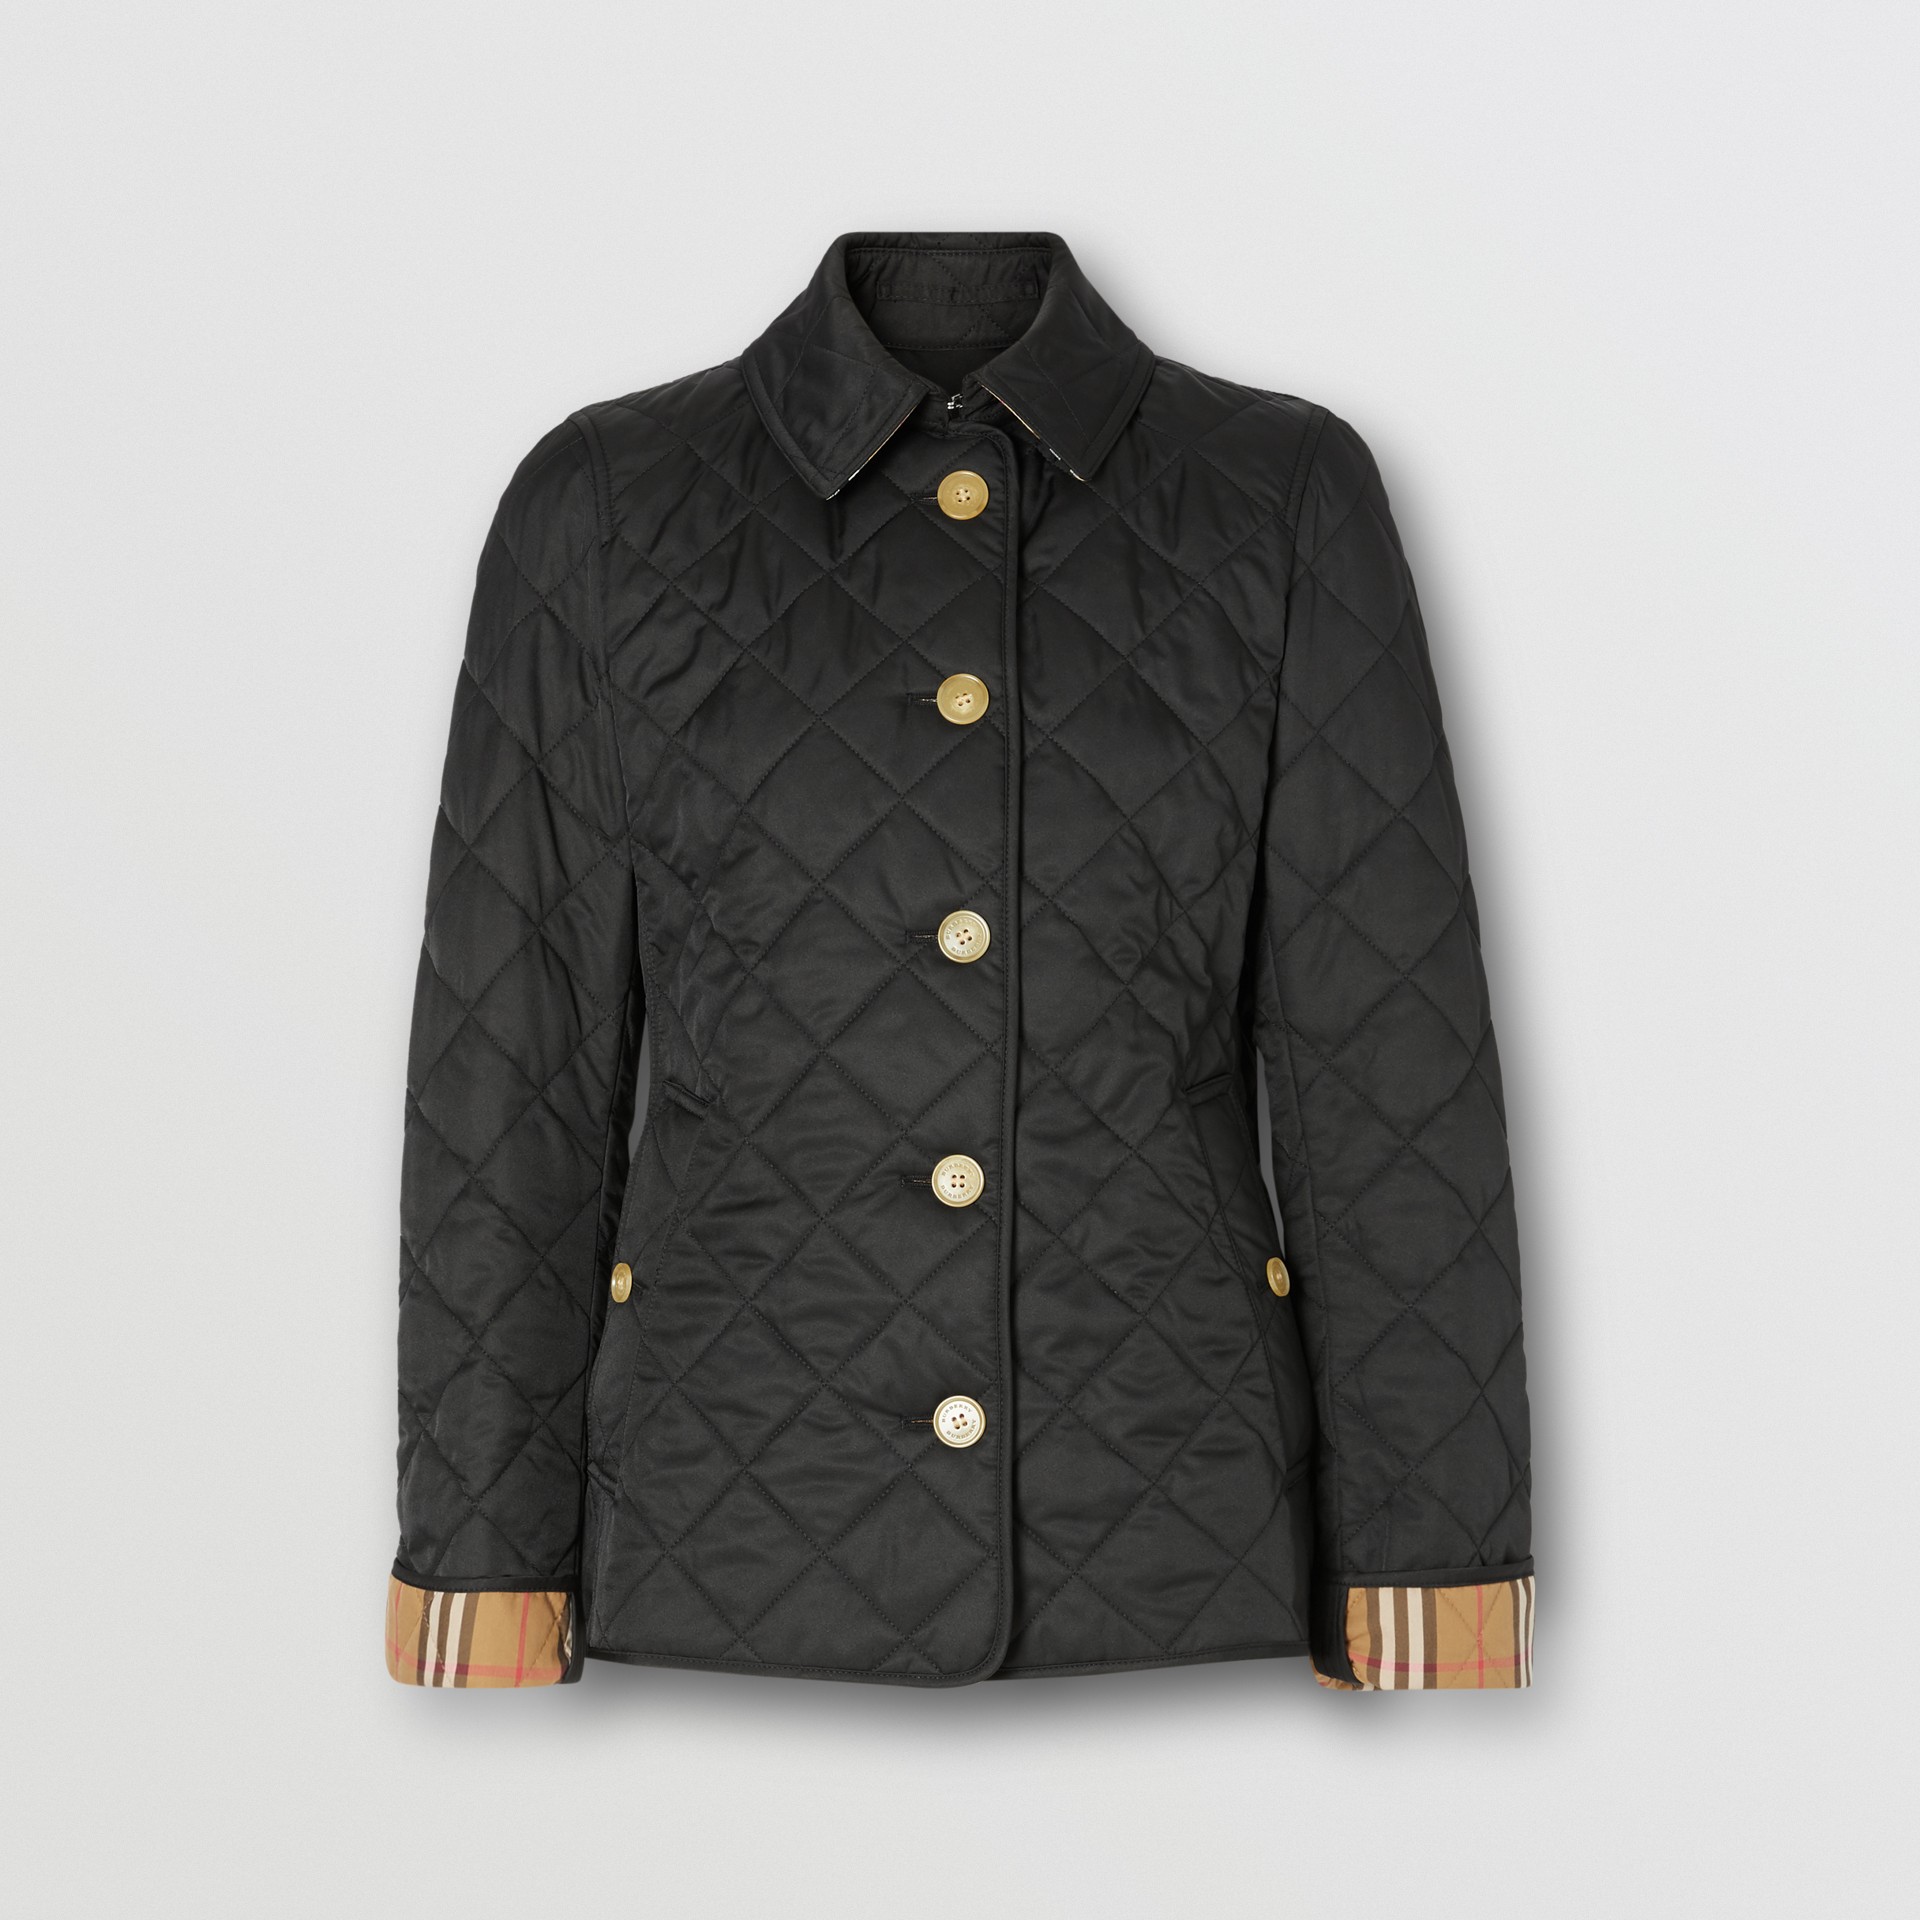 Diamond Quilted Jacket in Black - Women | Burberry United Kingdom